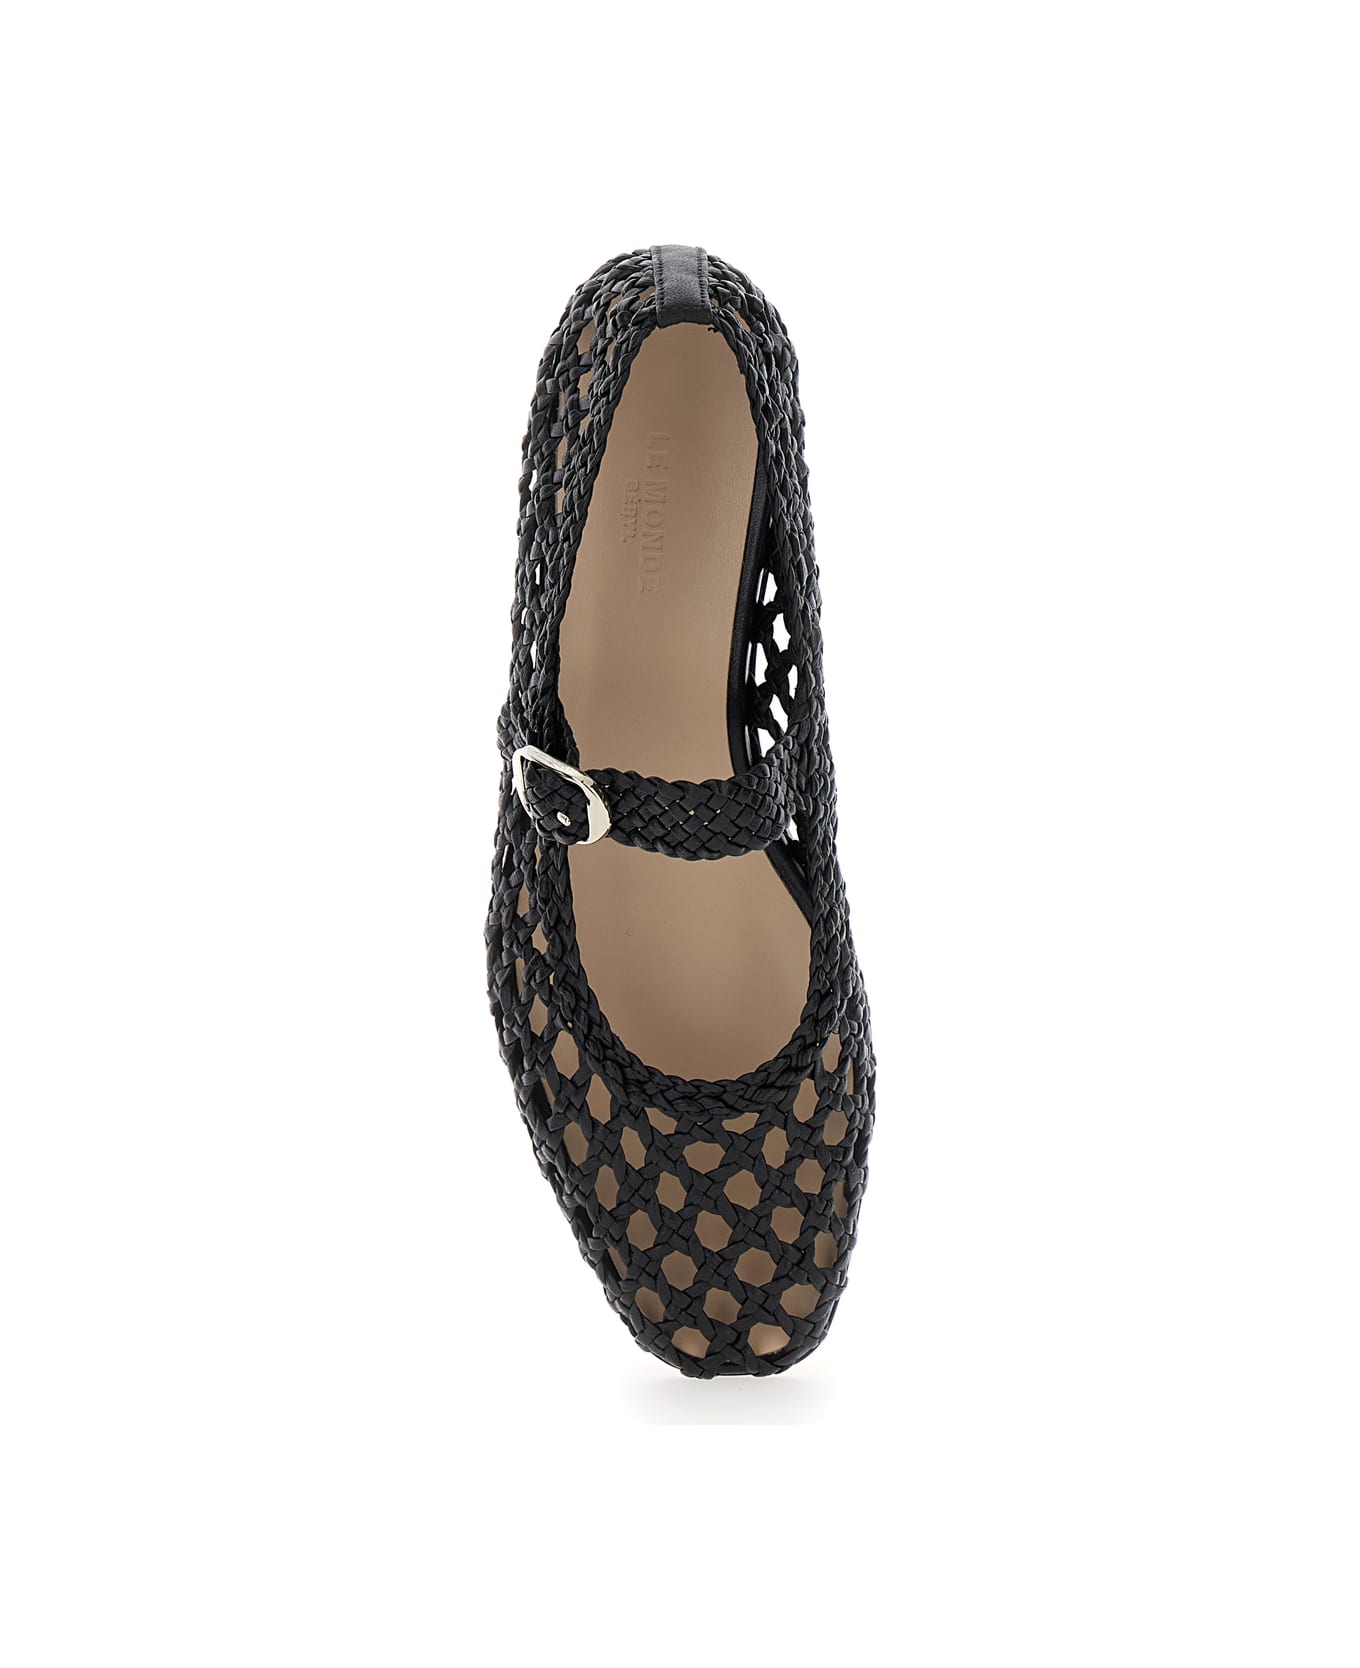 Le Monde Beryl Black Mary Jane With Strap In Woven Leather Woman - Black